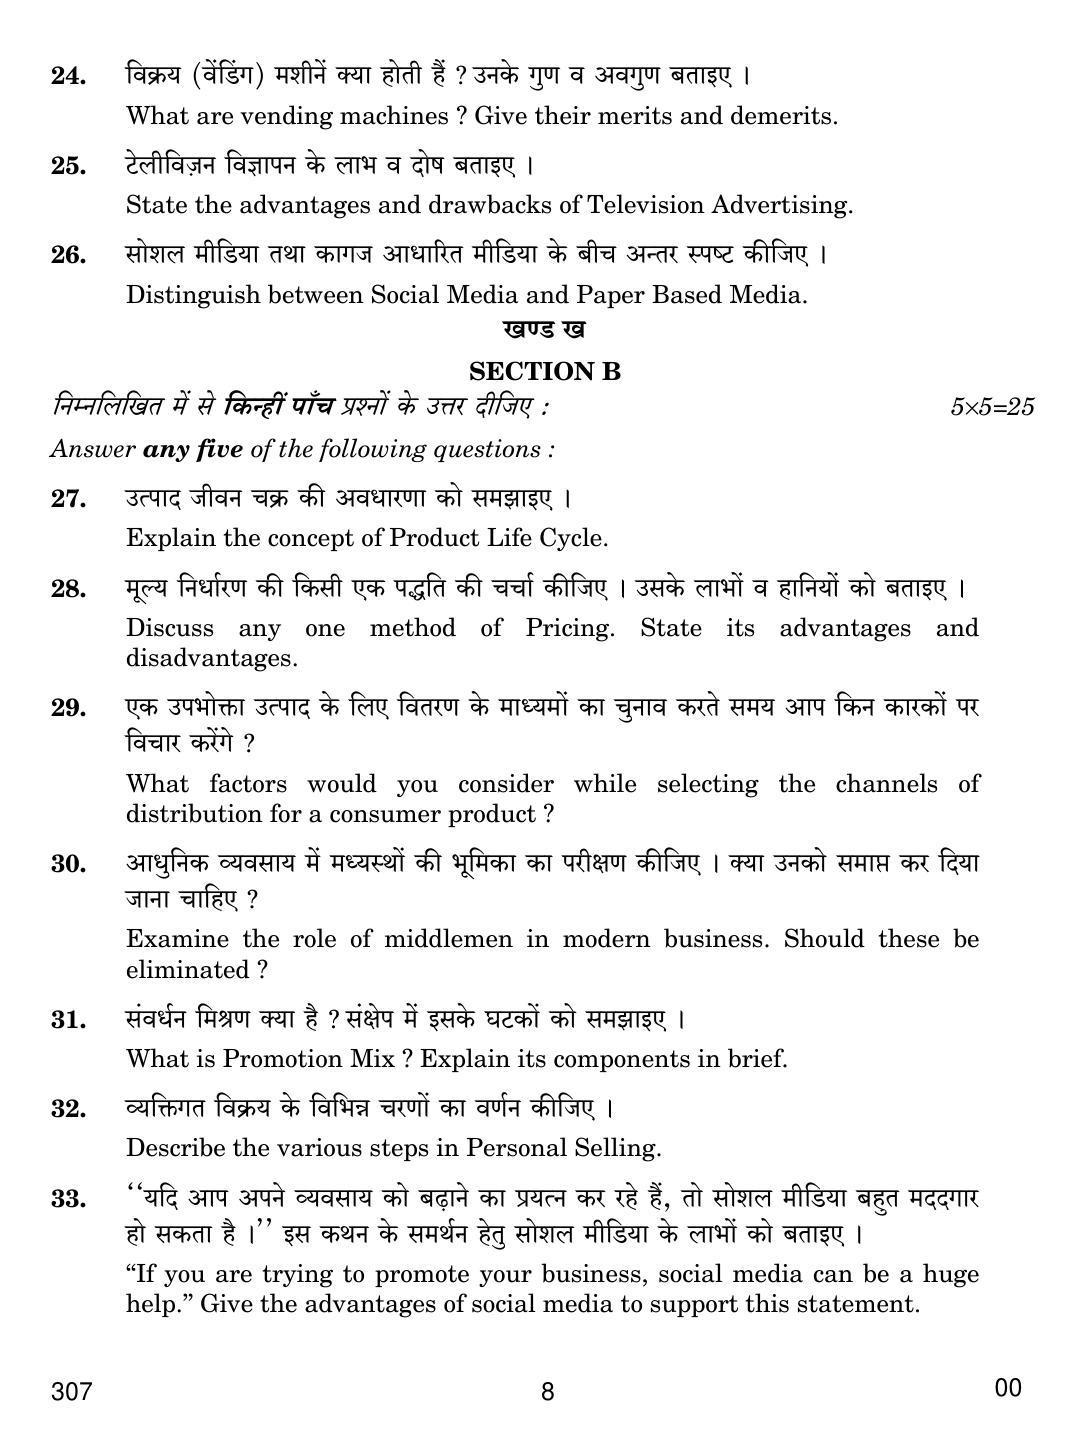 CBSE Class 12 307 Marketing 2019 Question Paper - Page 8